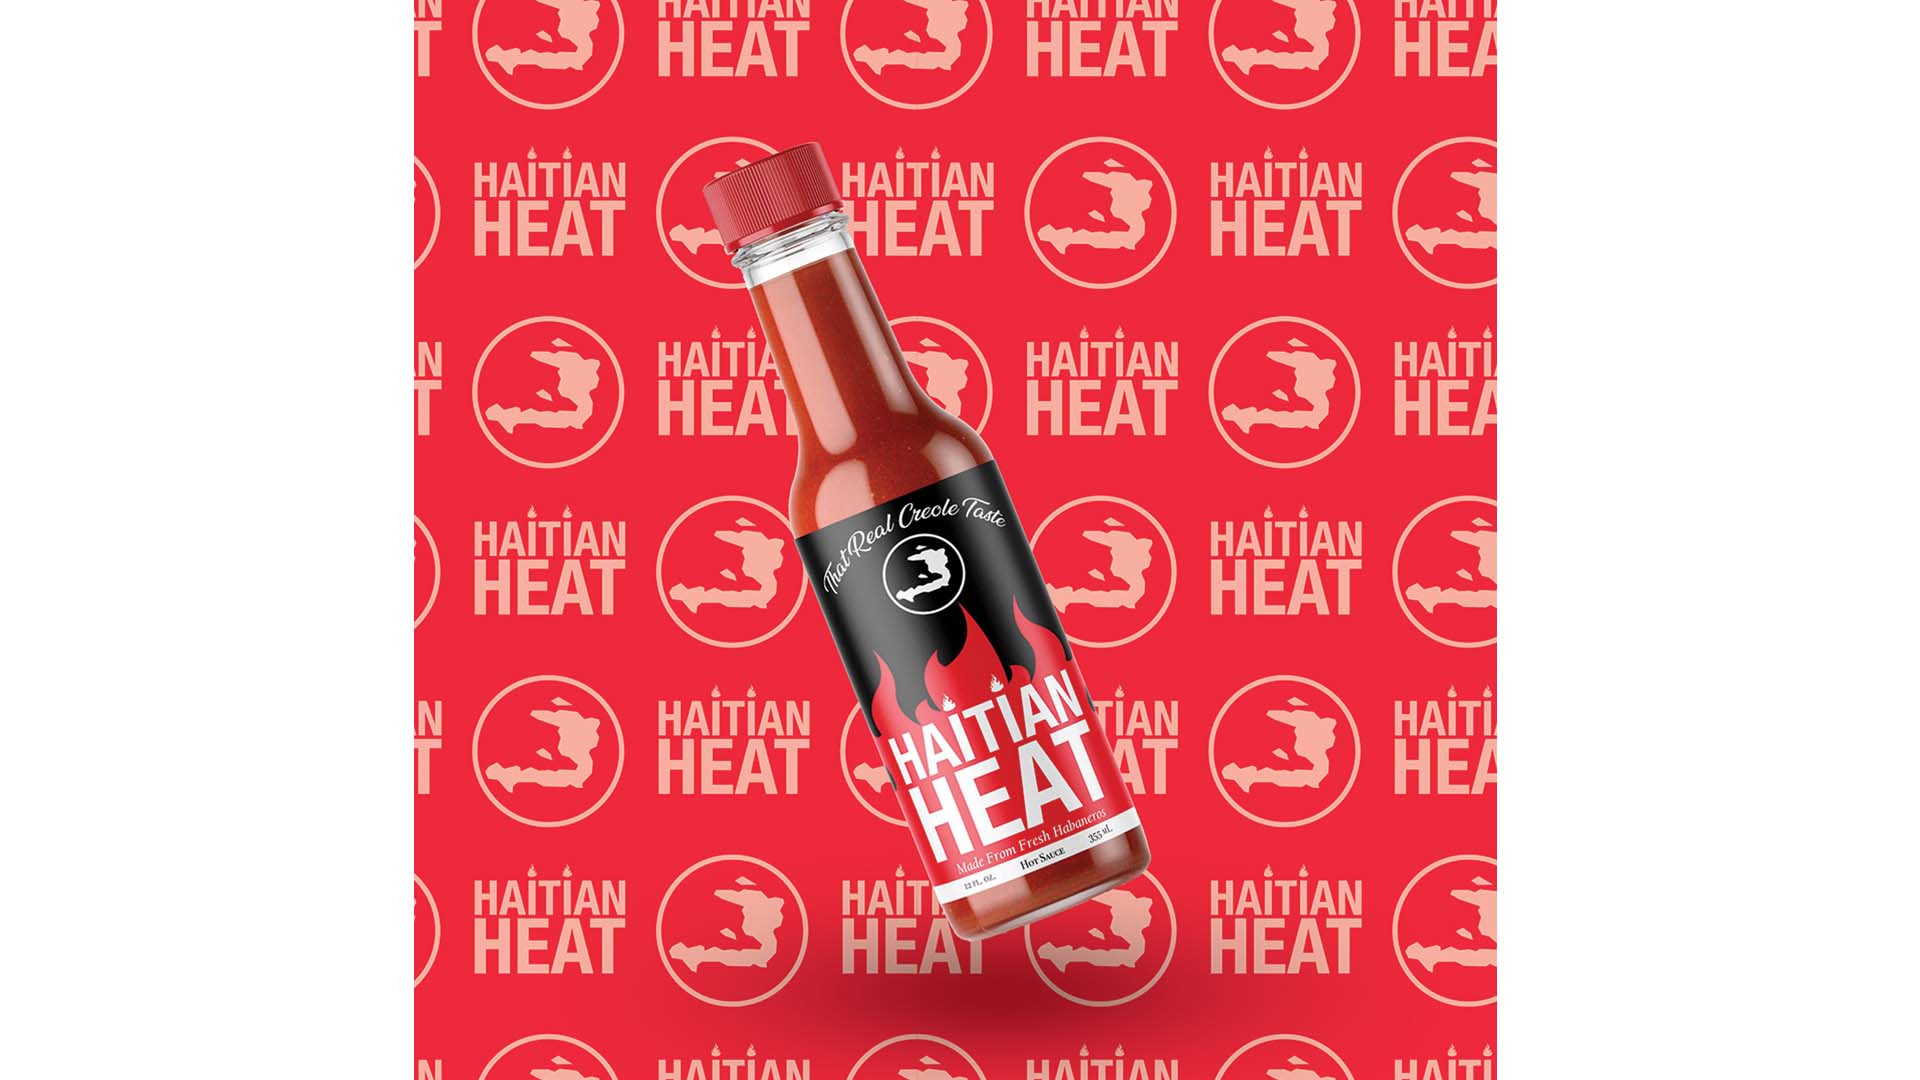  / “Haitian Heat,” product design, 2021. A product design branded for a company called Haitian Heat.